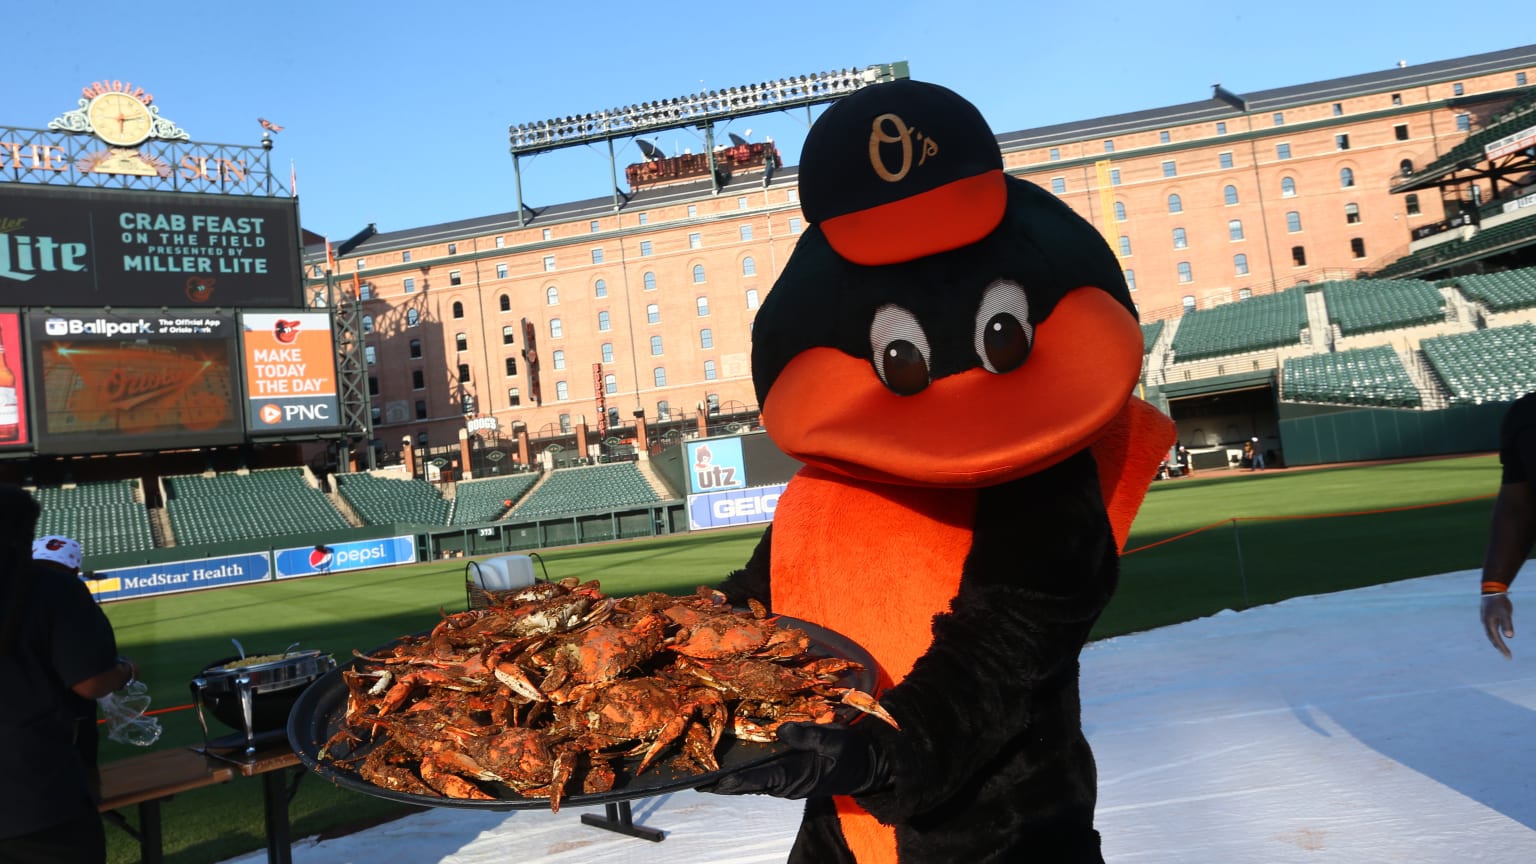 Crab Feast on the Field presented by Miller Lite Tickets Baltimore